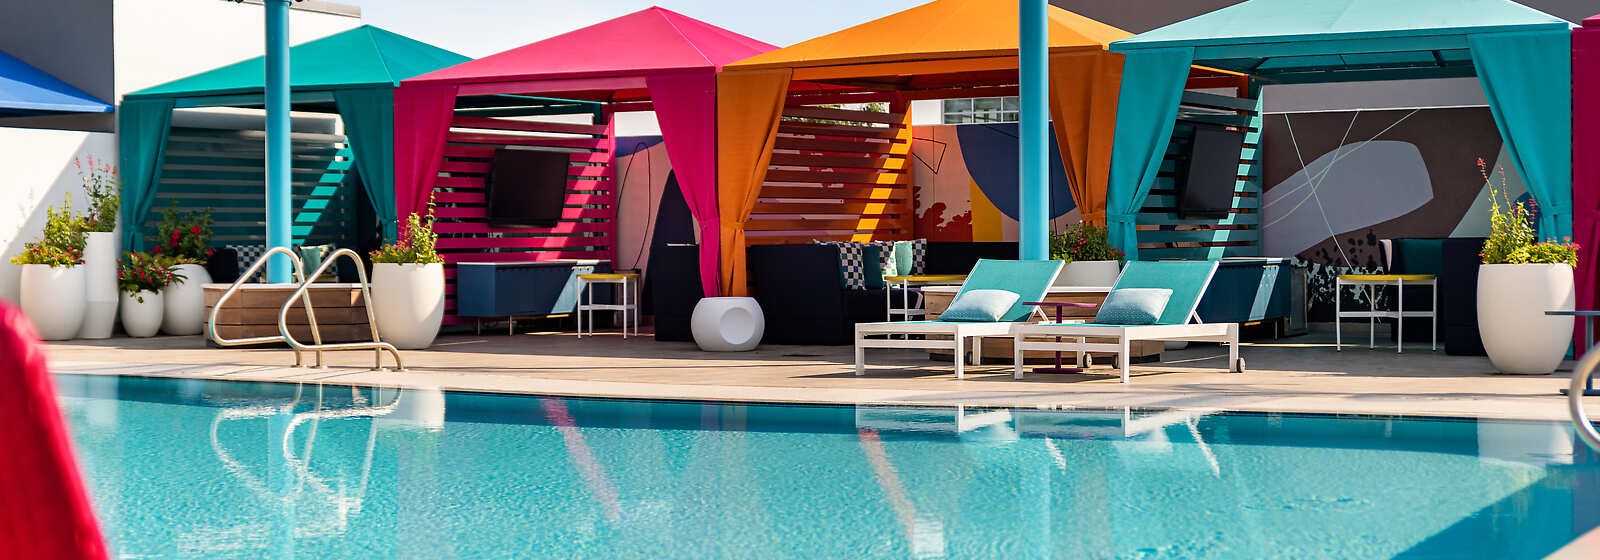 Florida's Most Colorful Pool Deck at Lake Nona Wave Hotel